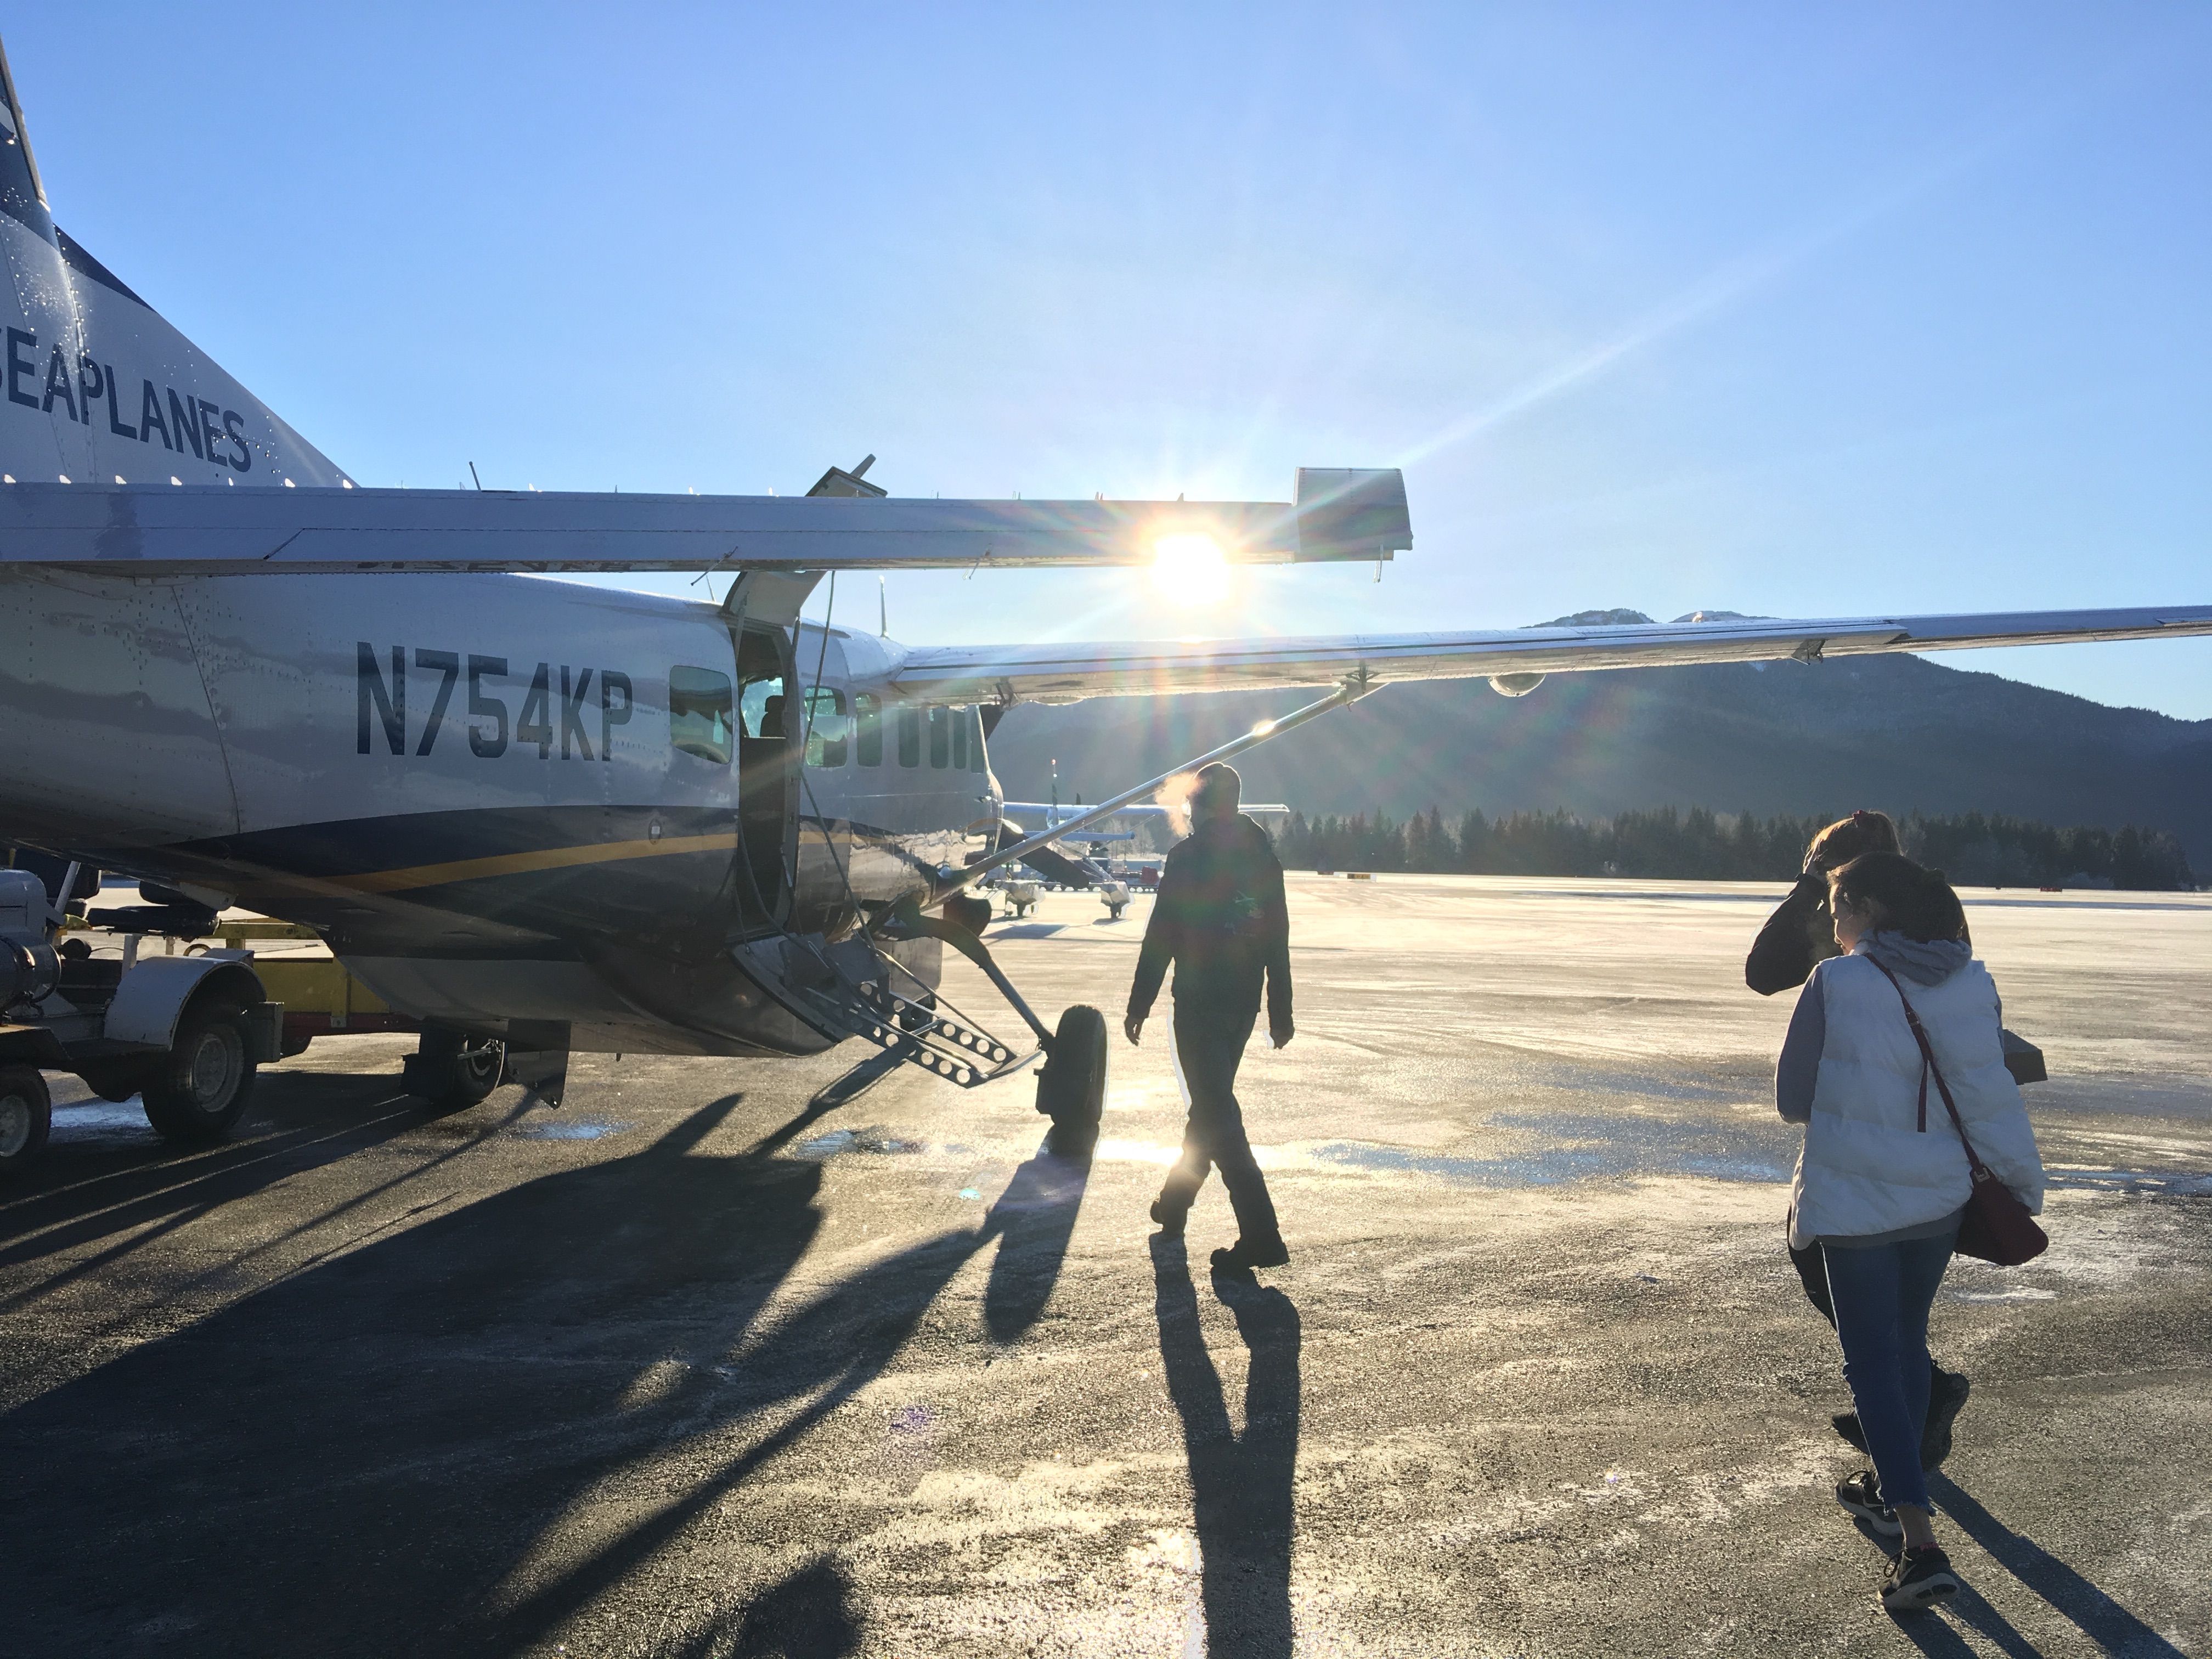 Almost everyone going to or from Kake has to travel on a small seaplane. Image by Brooke Stephenson. United States, 2019.